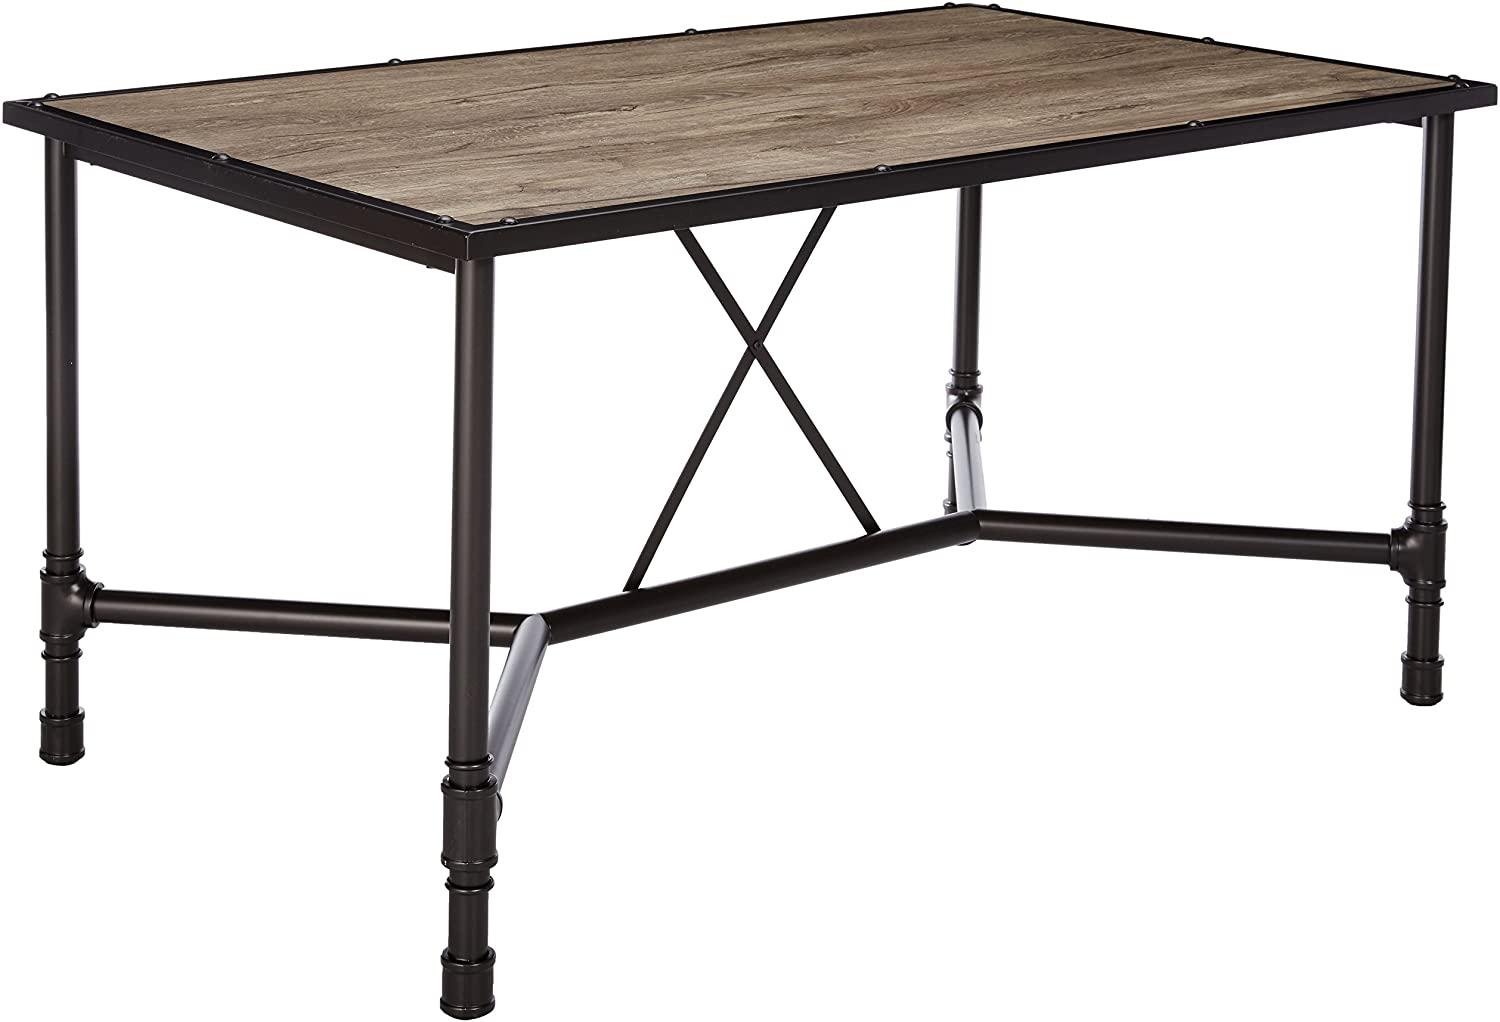 Contemporary Dining Table Caitlin 72035 in Oak, Black 